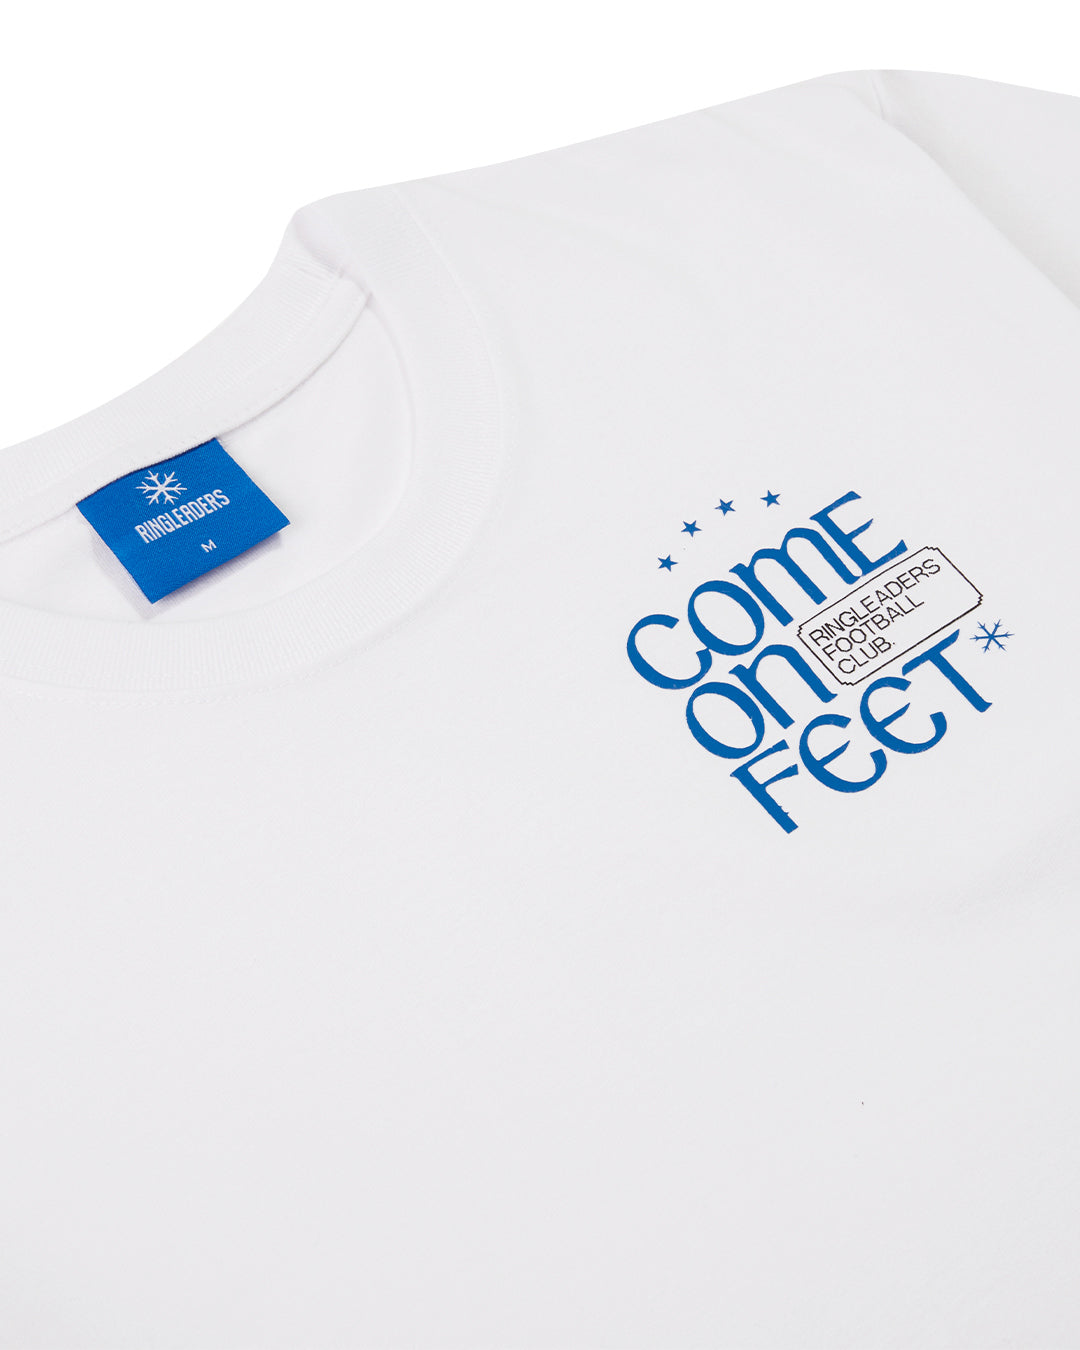 "Come on Feet"  S/S T-shirt